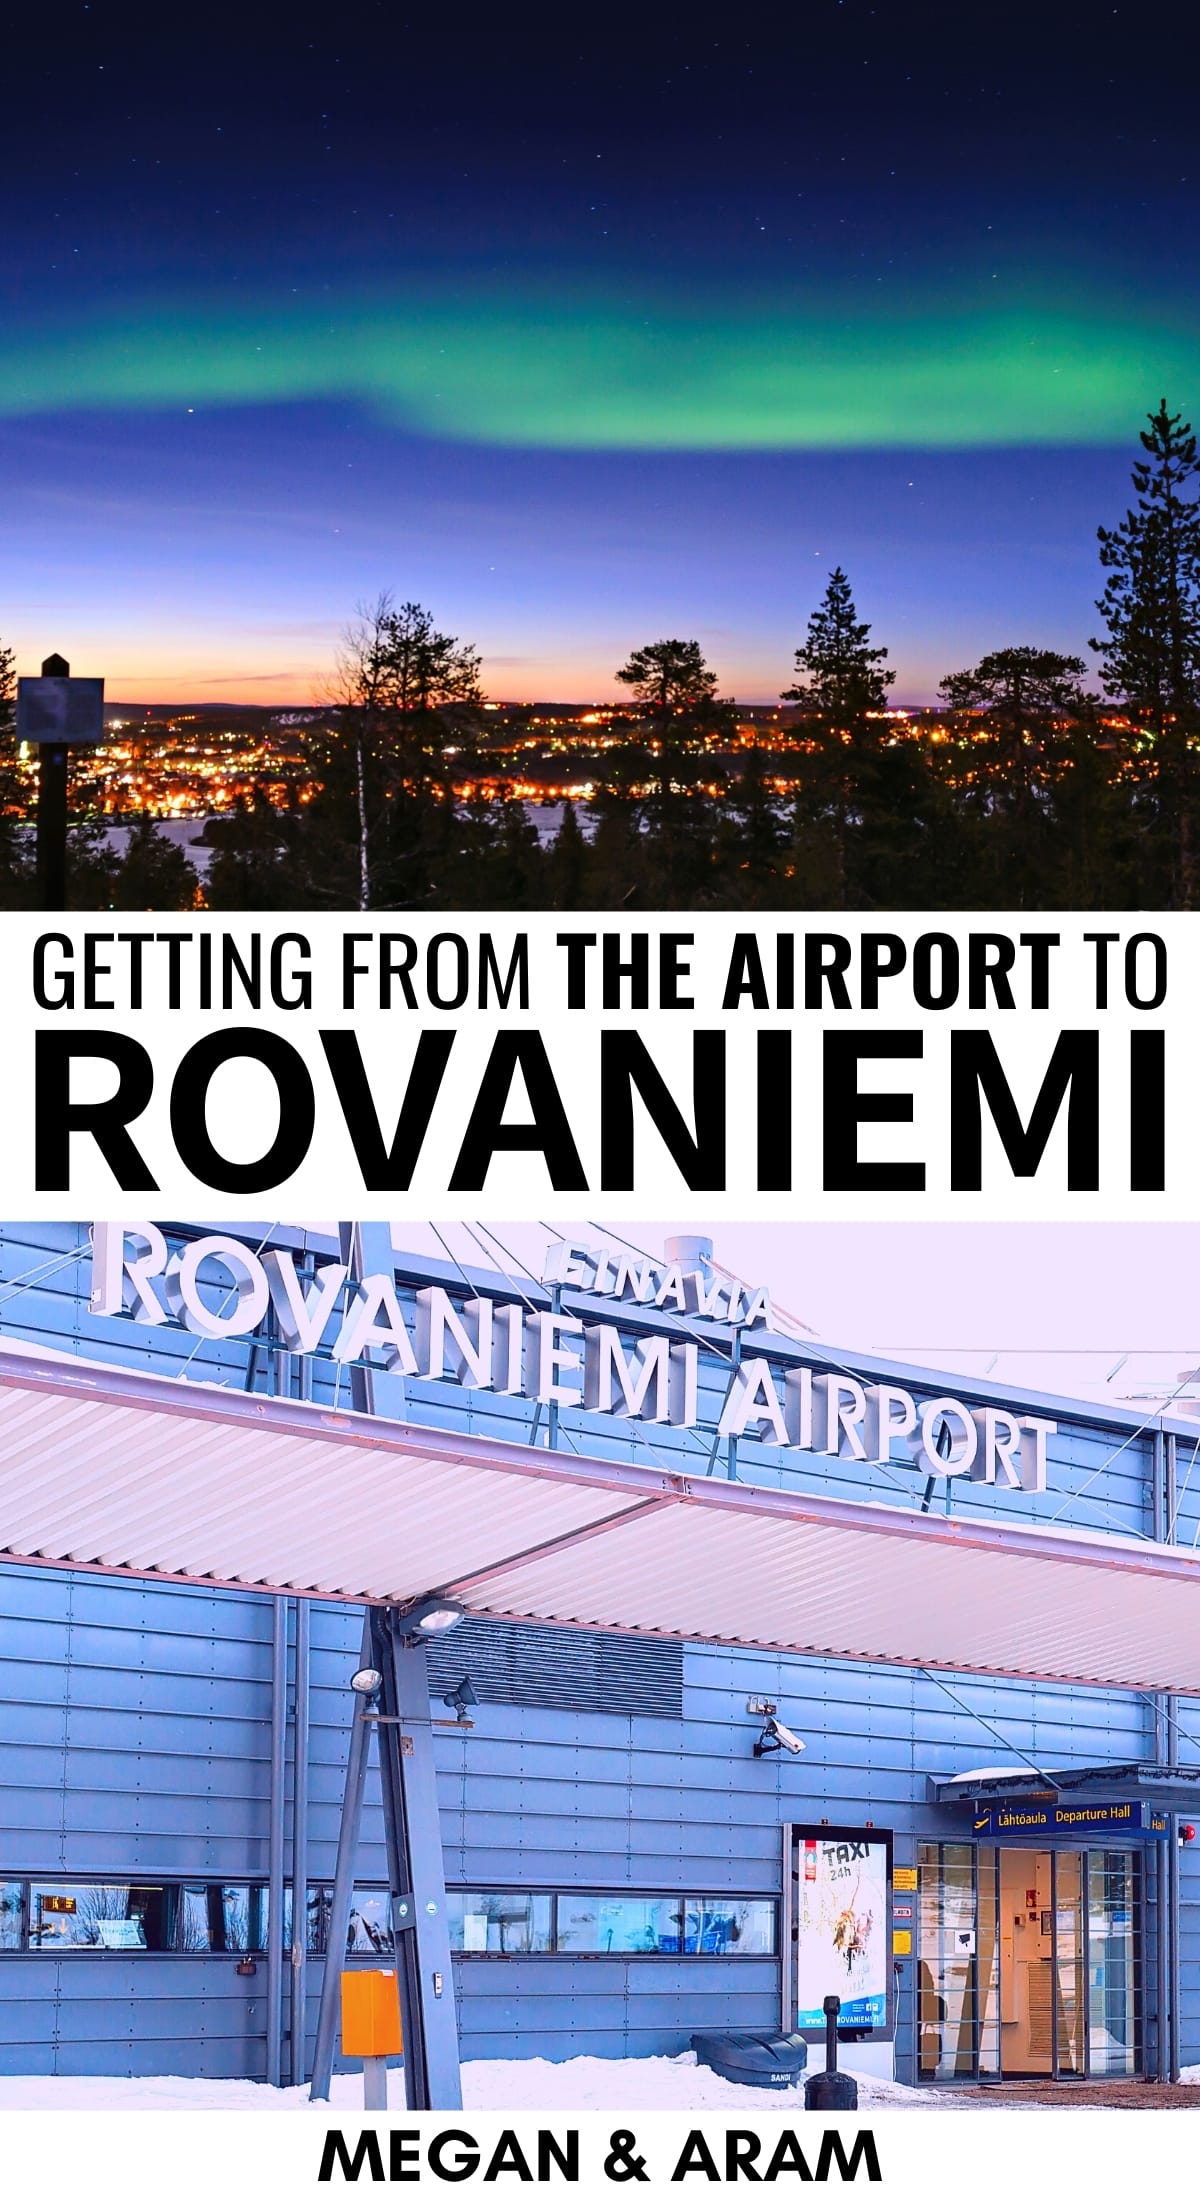 Are you considering your options for getting from Rovaniemi Airport to the city and aren't sure which is best for you? This guide details 4 great options from public transportation to private transfers to taxi services. | Visit Rovaniemi | Travel to Rovaniemi | Lapland travel | Finland travel | Visit Lapland | Rovaniemi itinerary | Visit Santa Claus Village